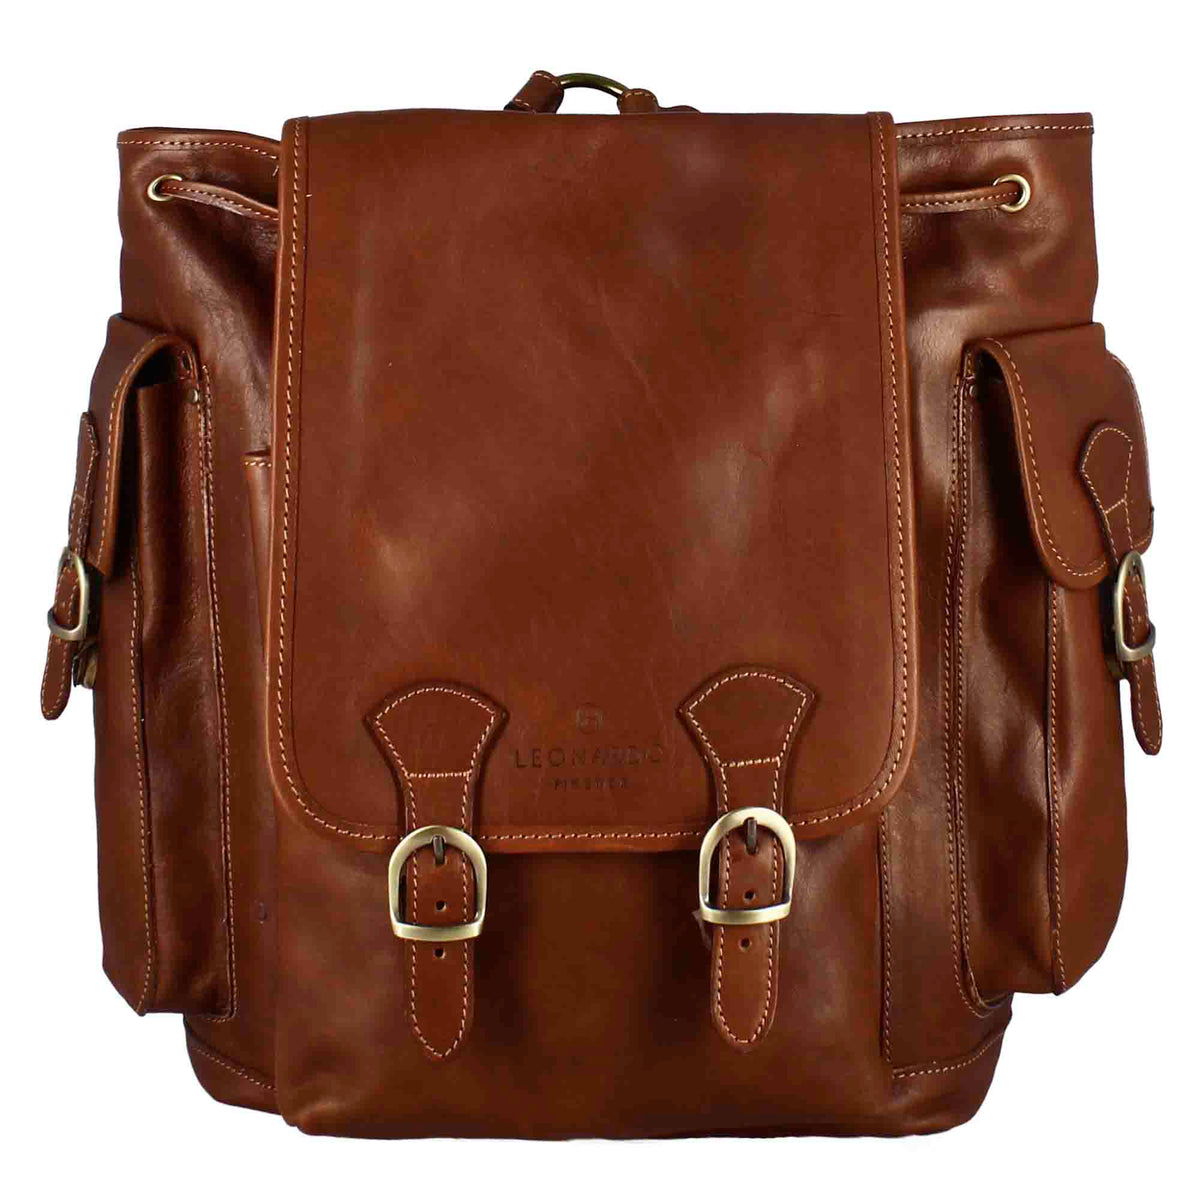 Men's full-grain leather multi-pocket backpack with buckle fastening brown colour